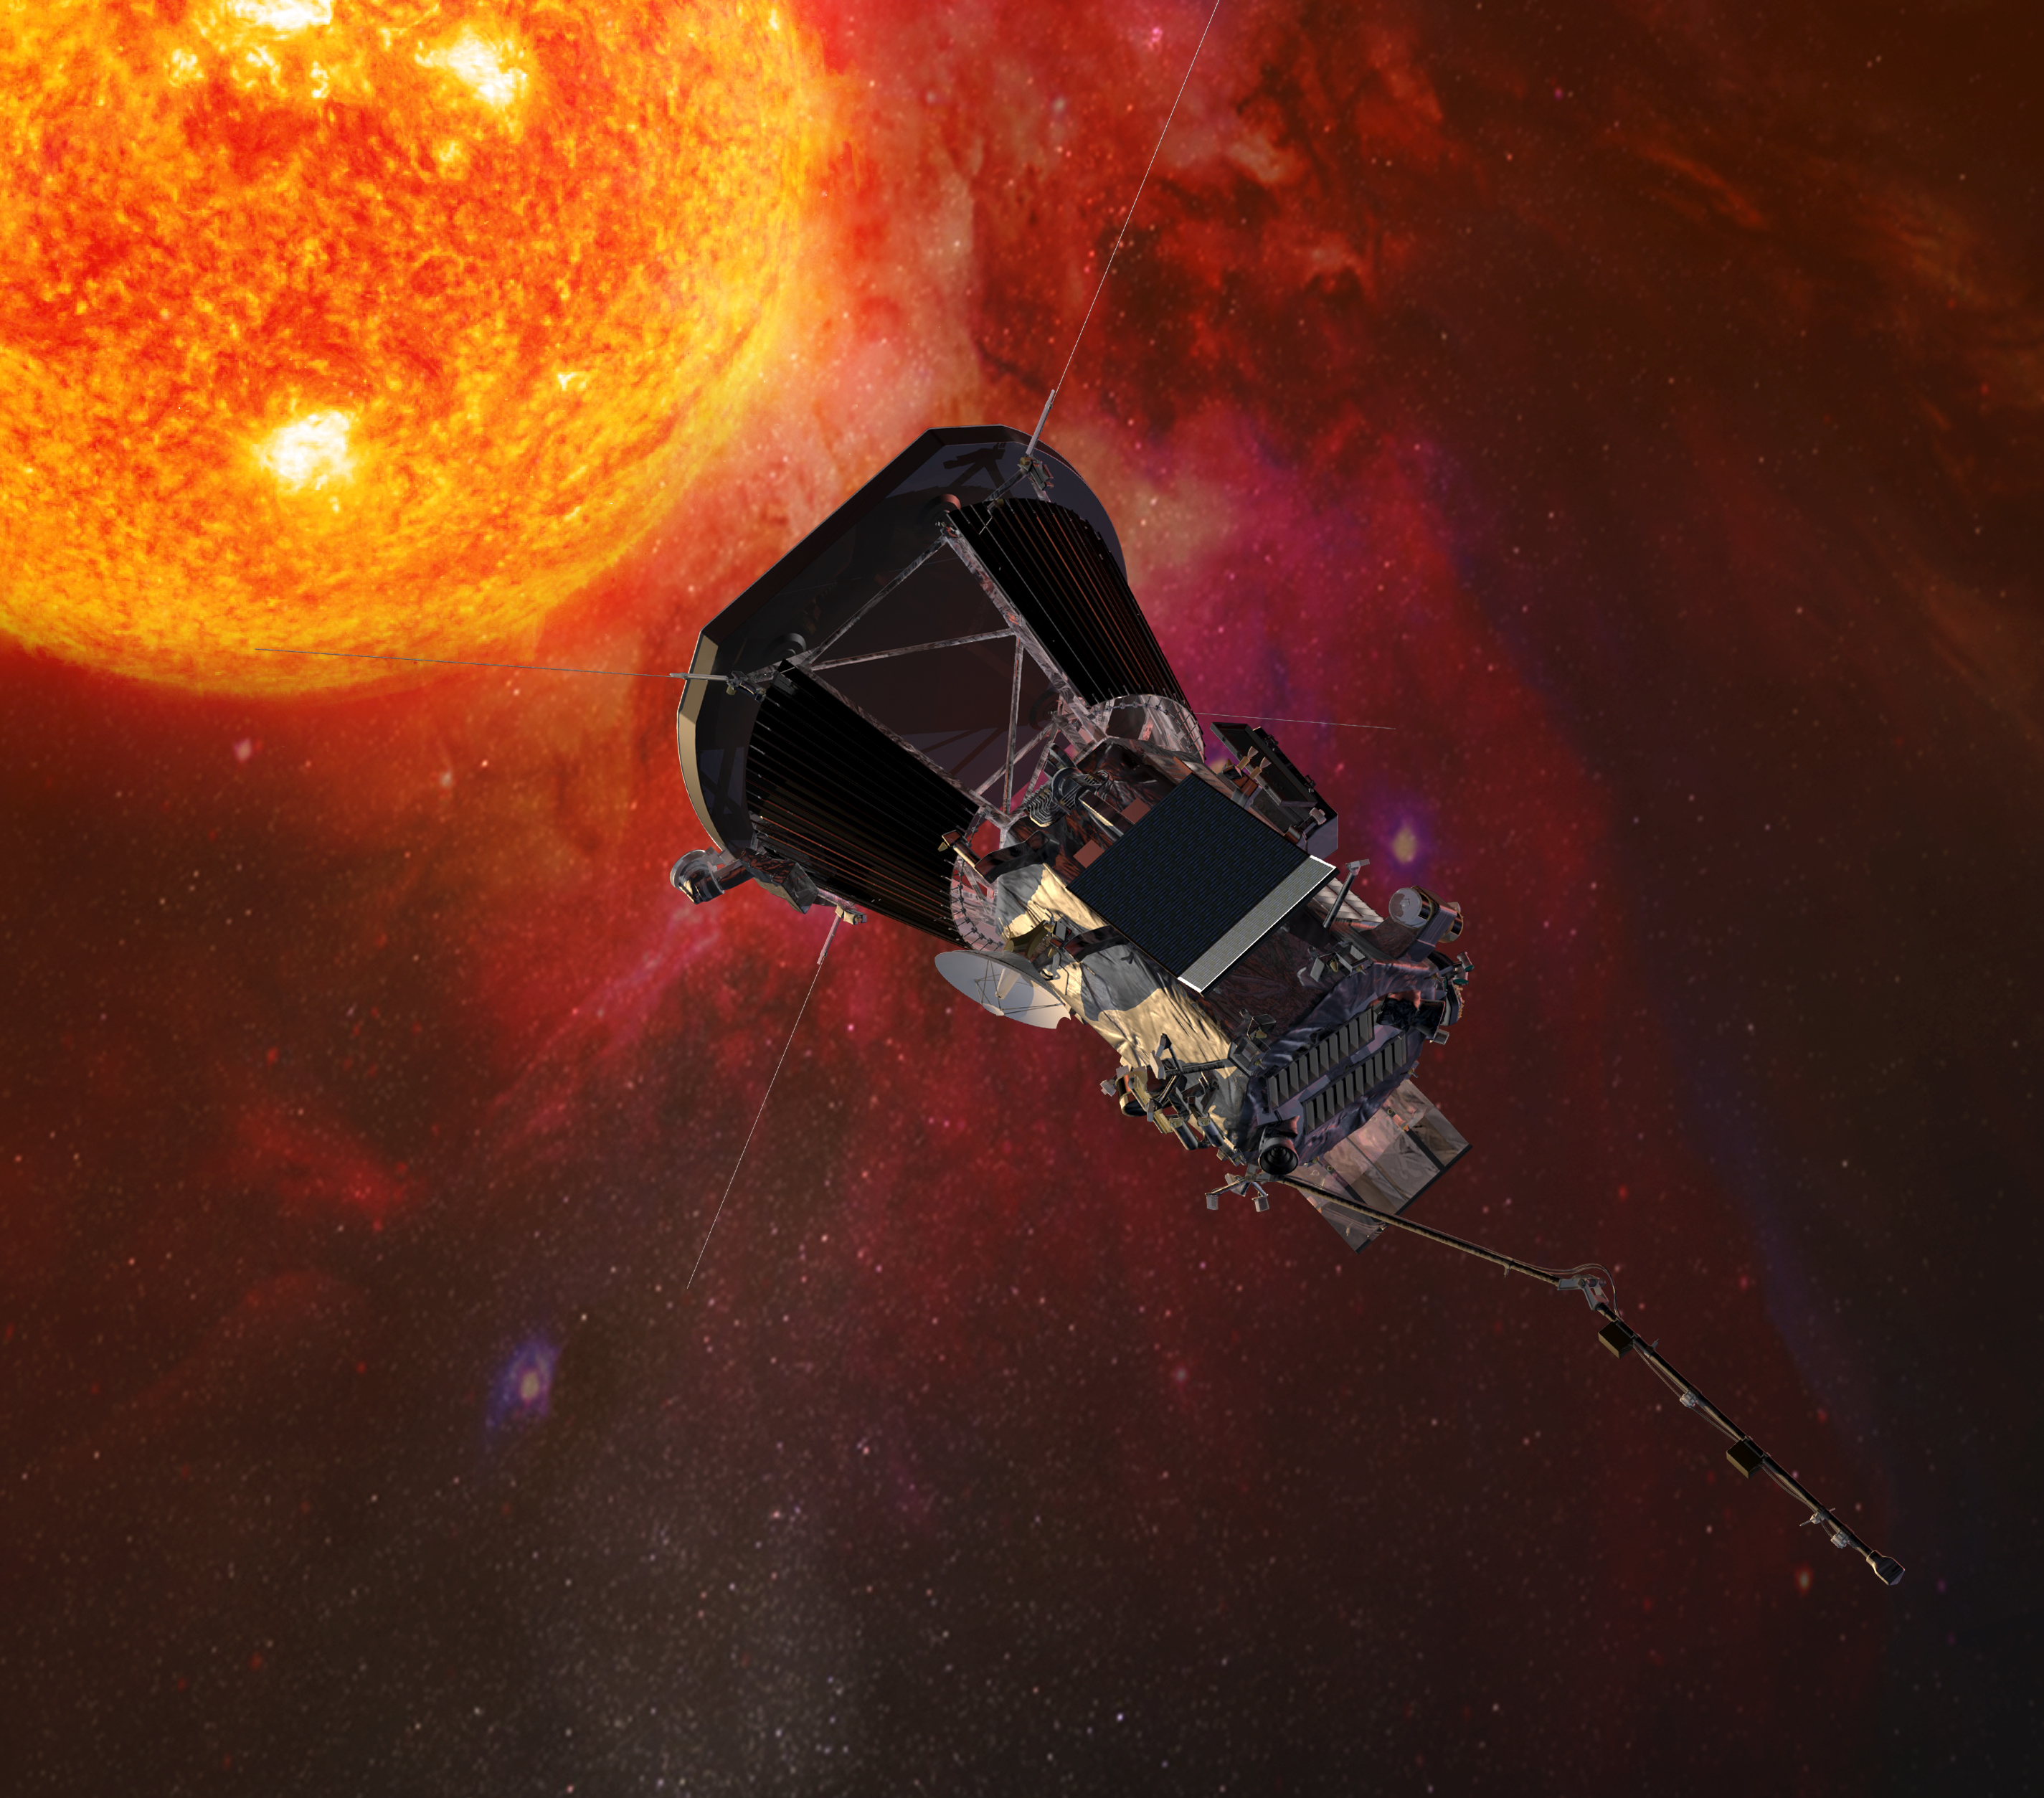 The solar panels are shown here on this artist rendering of Parker Solar Probe; they are the black squares with gray rectangles on the center of the spacecraft.